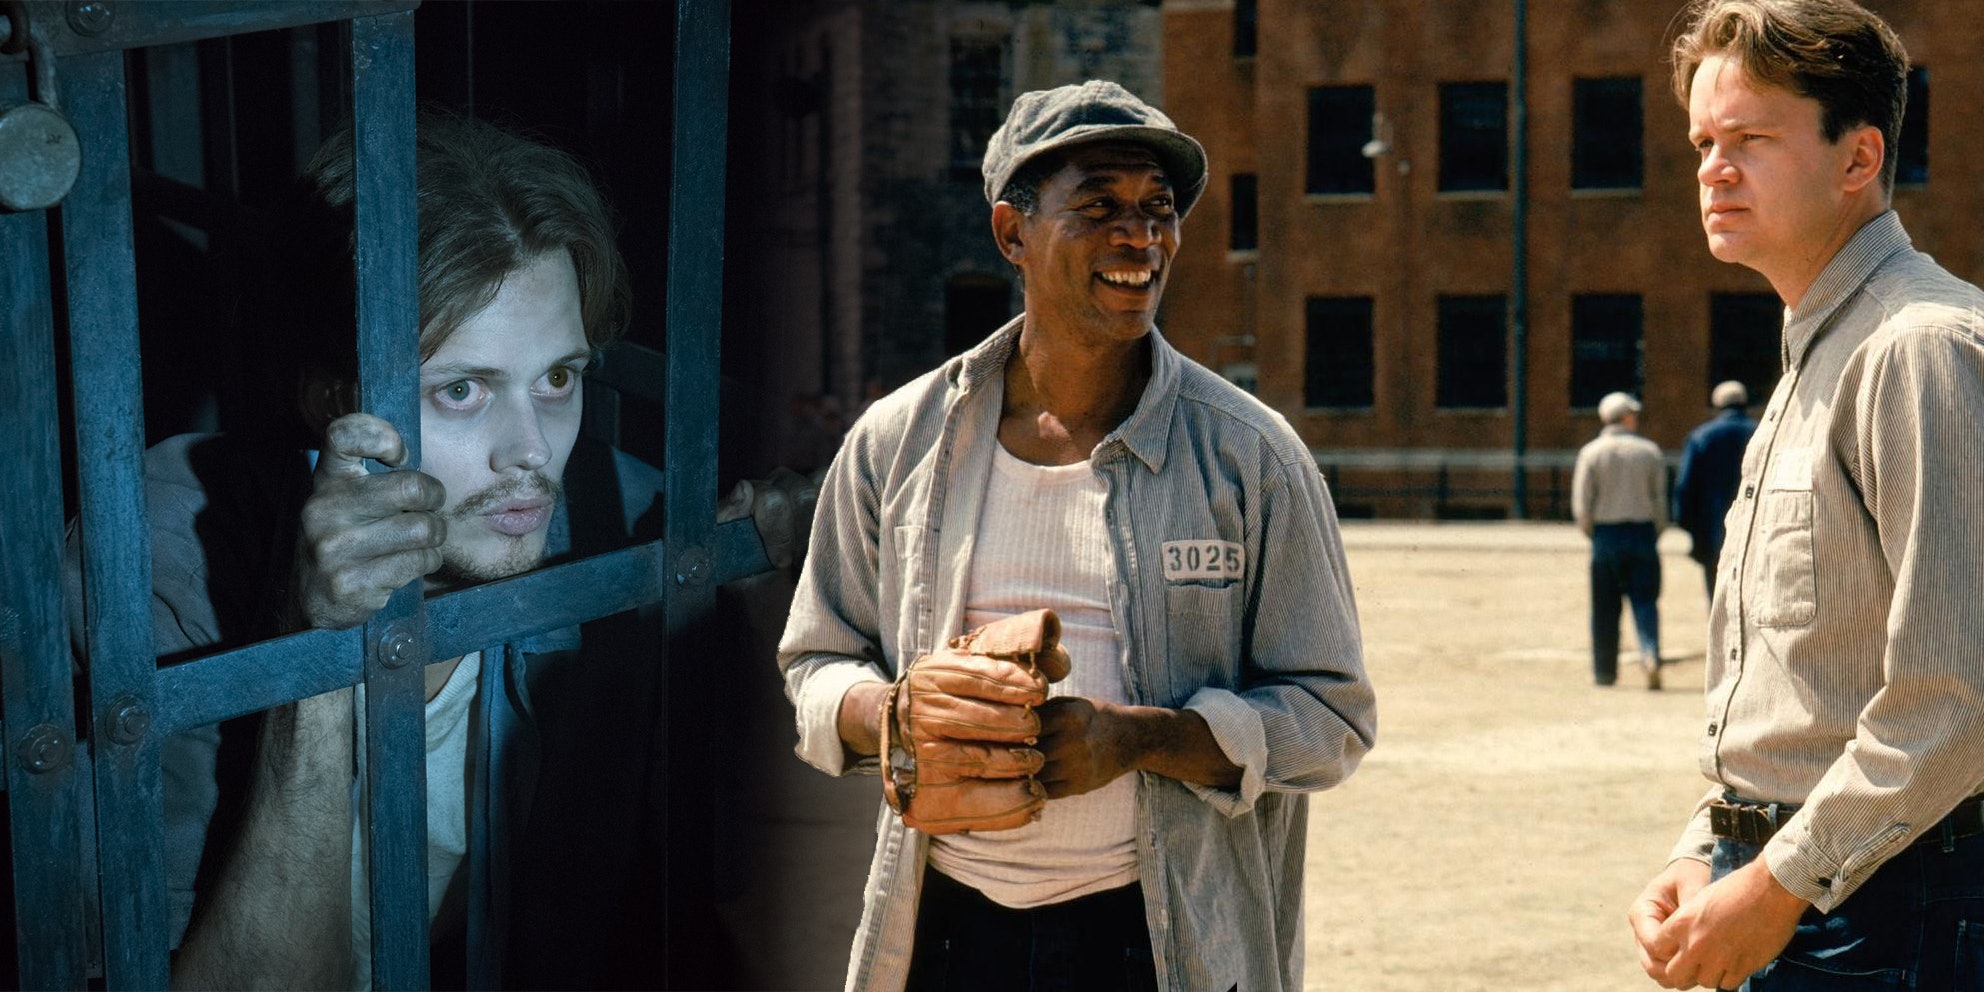 Castle Rock Showrunners Explain How They Changed Shawshank Prison